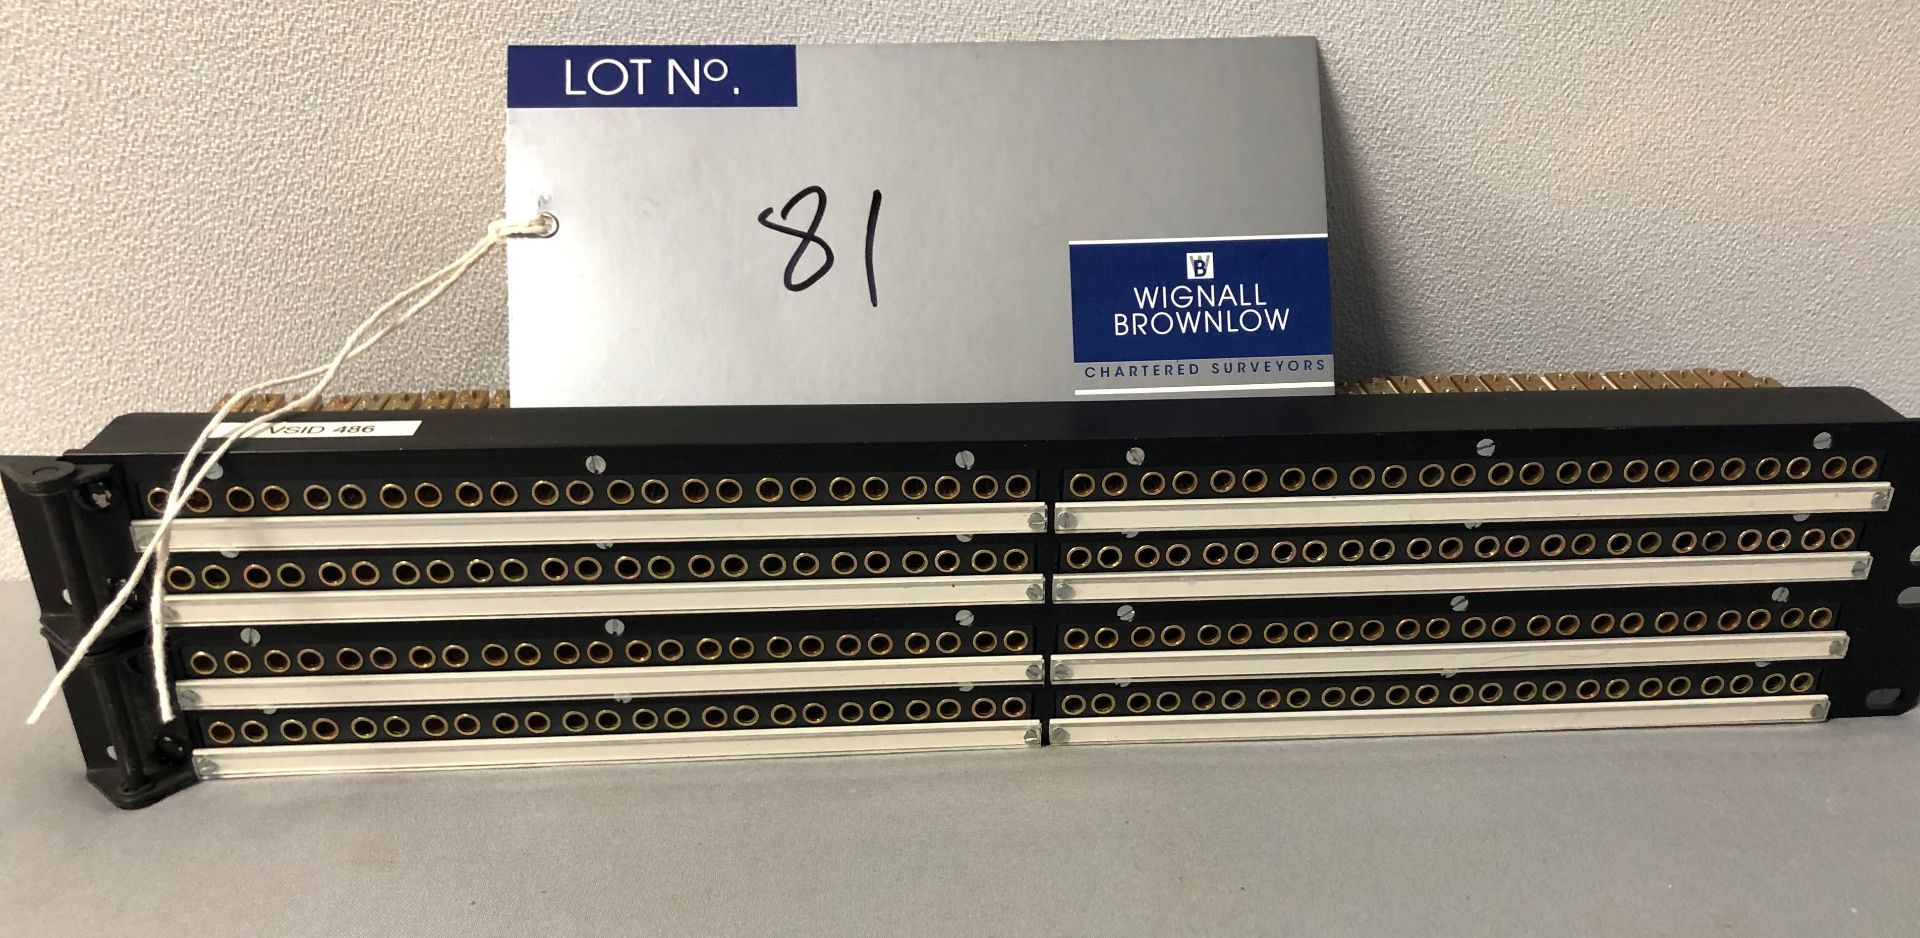 An Unused 48 way Bantam Patch Bay (not tested).